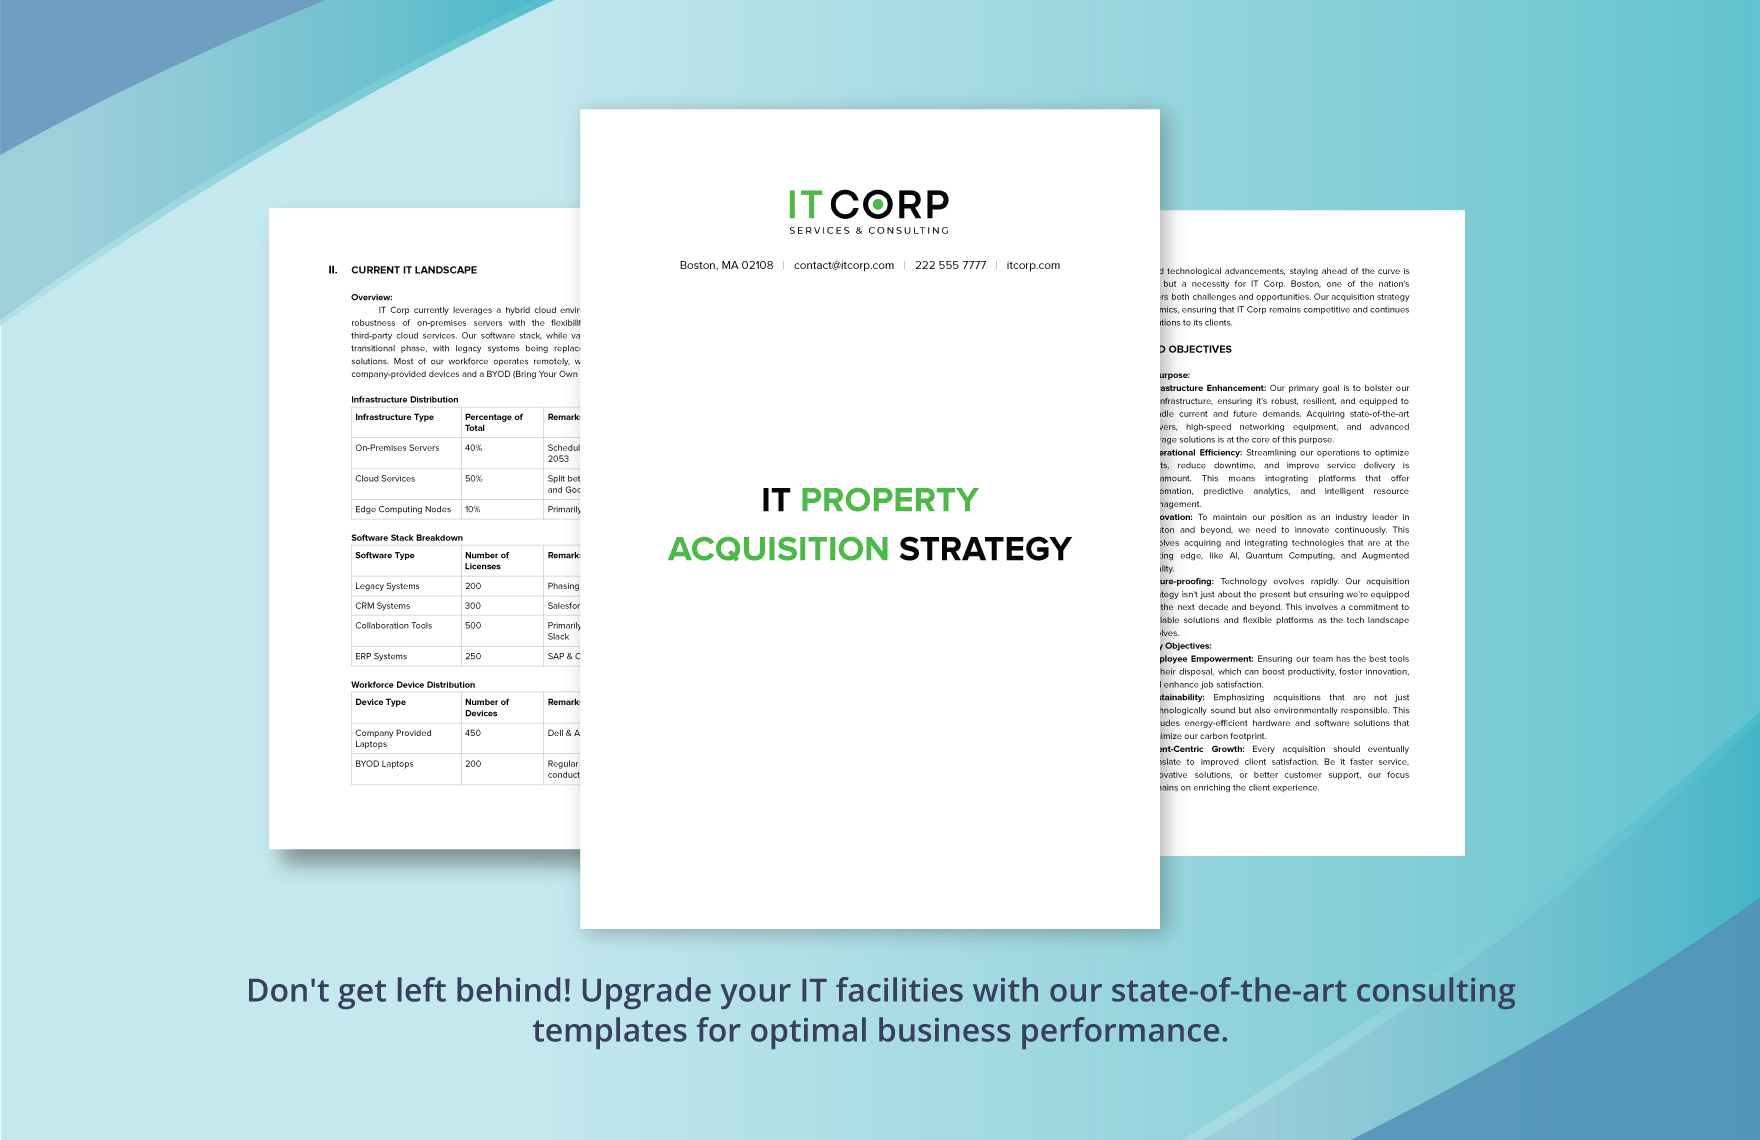 IT Property Acquisition Strategy Template